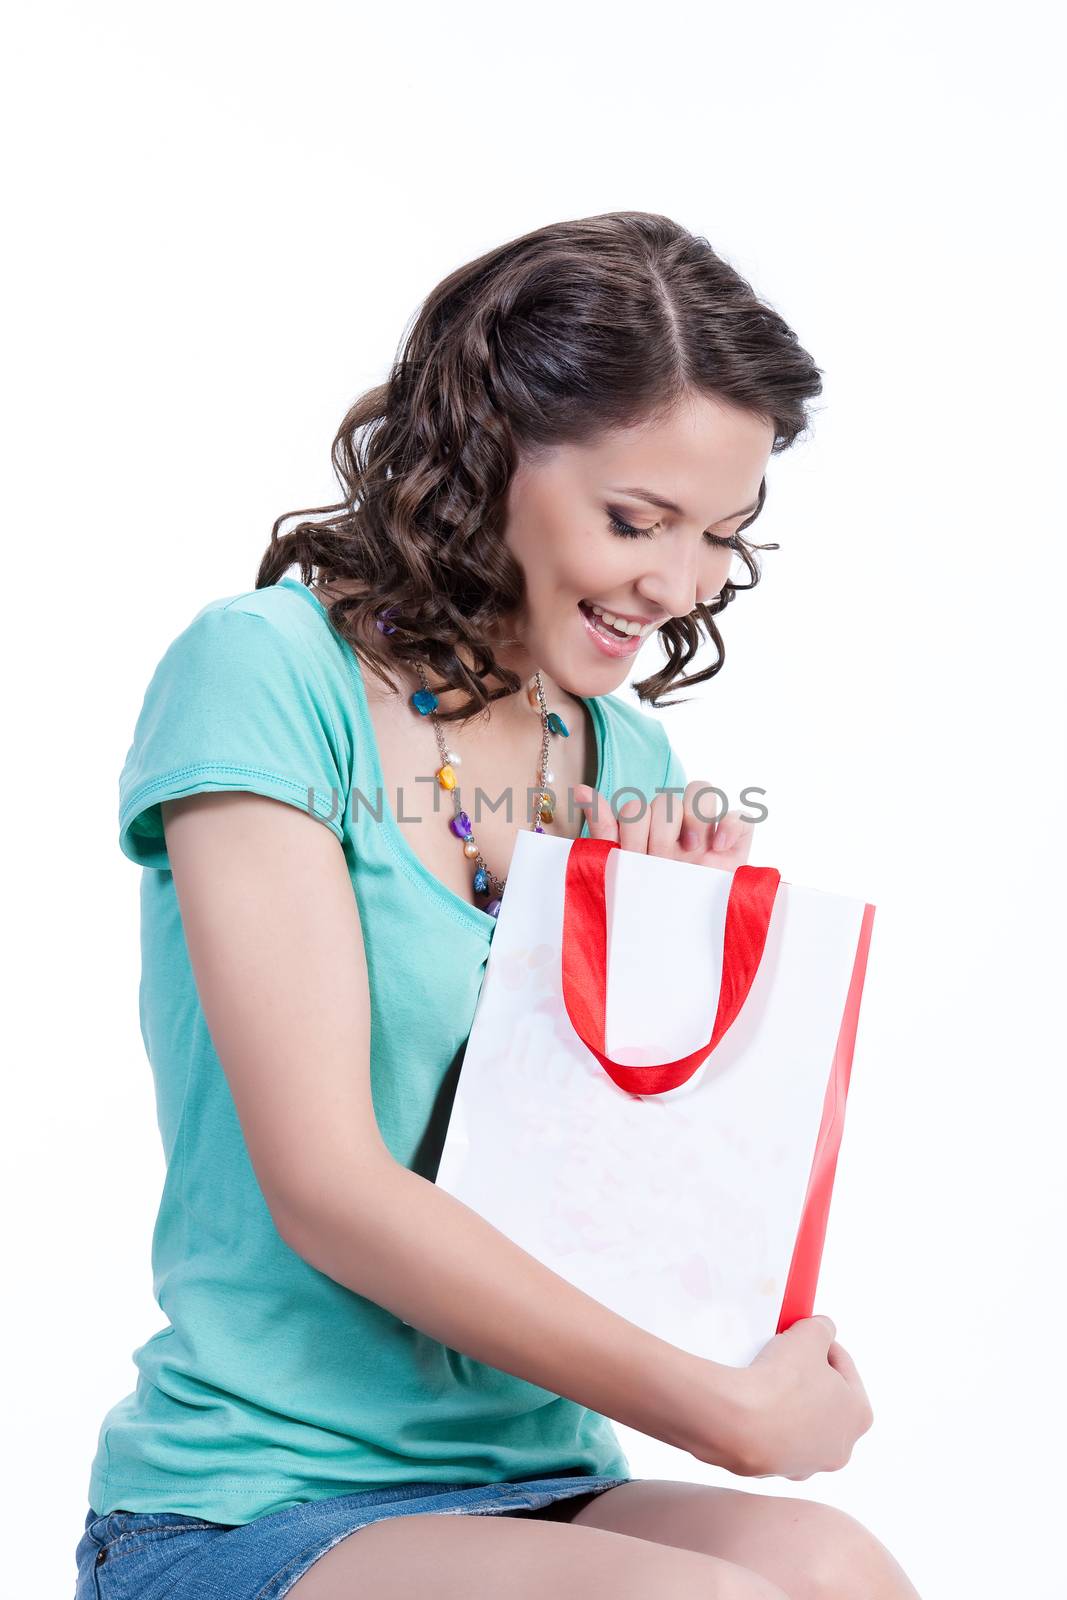 Young Emotional Woman With Paper Bag by Fotoskat